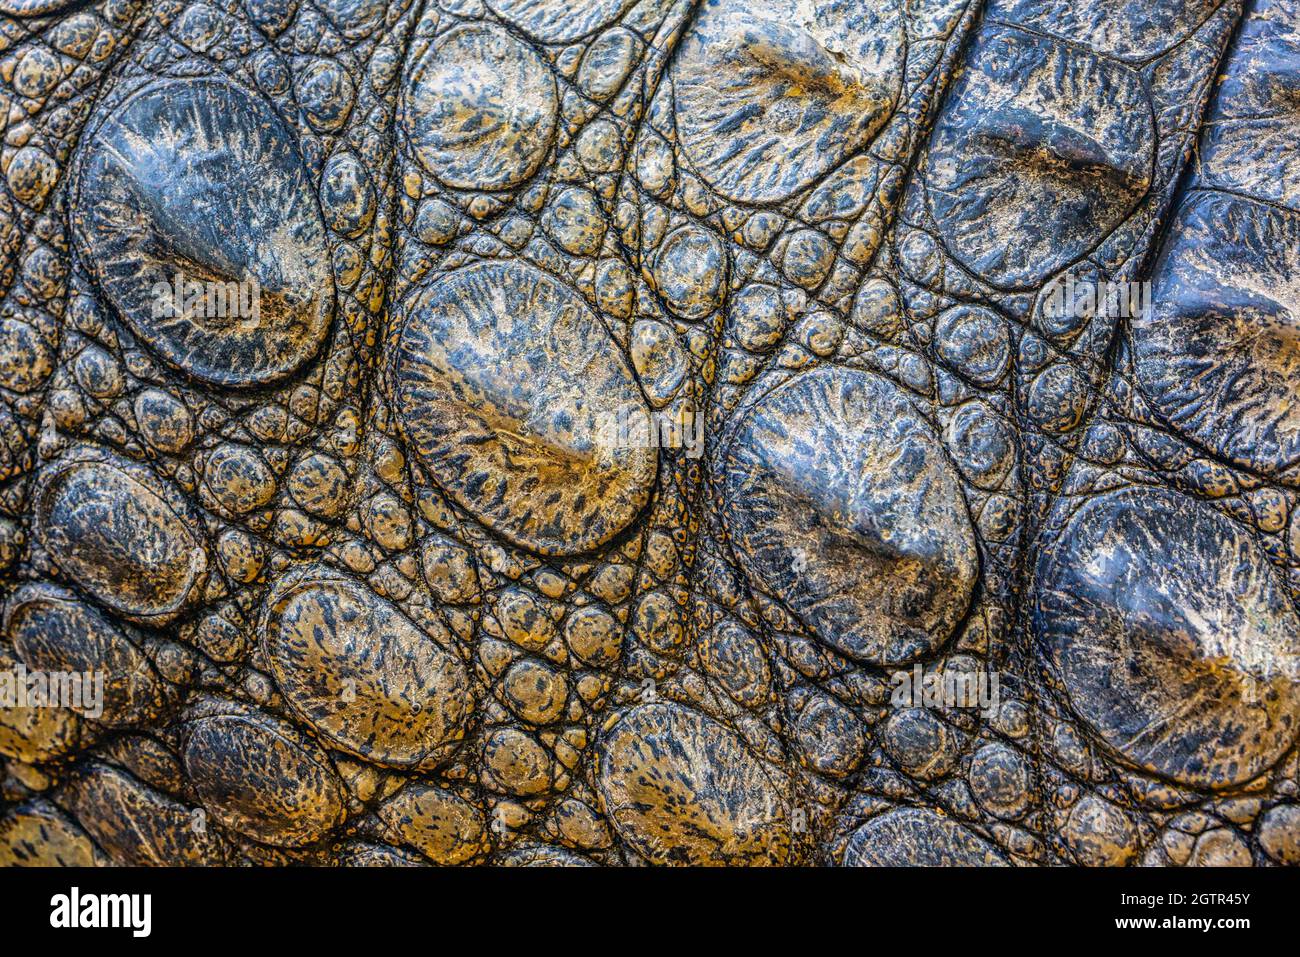 Close-up of armoured skin of Dwarf crocodile, also known as the African dwarf crocodile, bony crocodile or broad-snouted crocodile.  Osteolaemus tetra Stock Photo